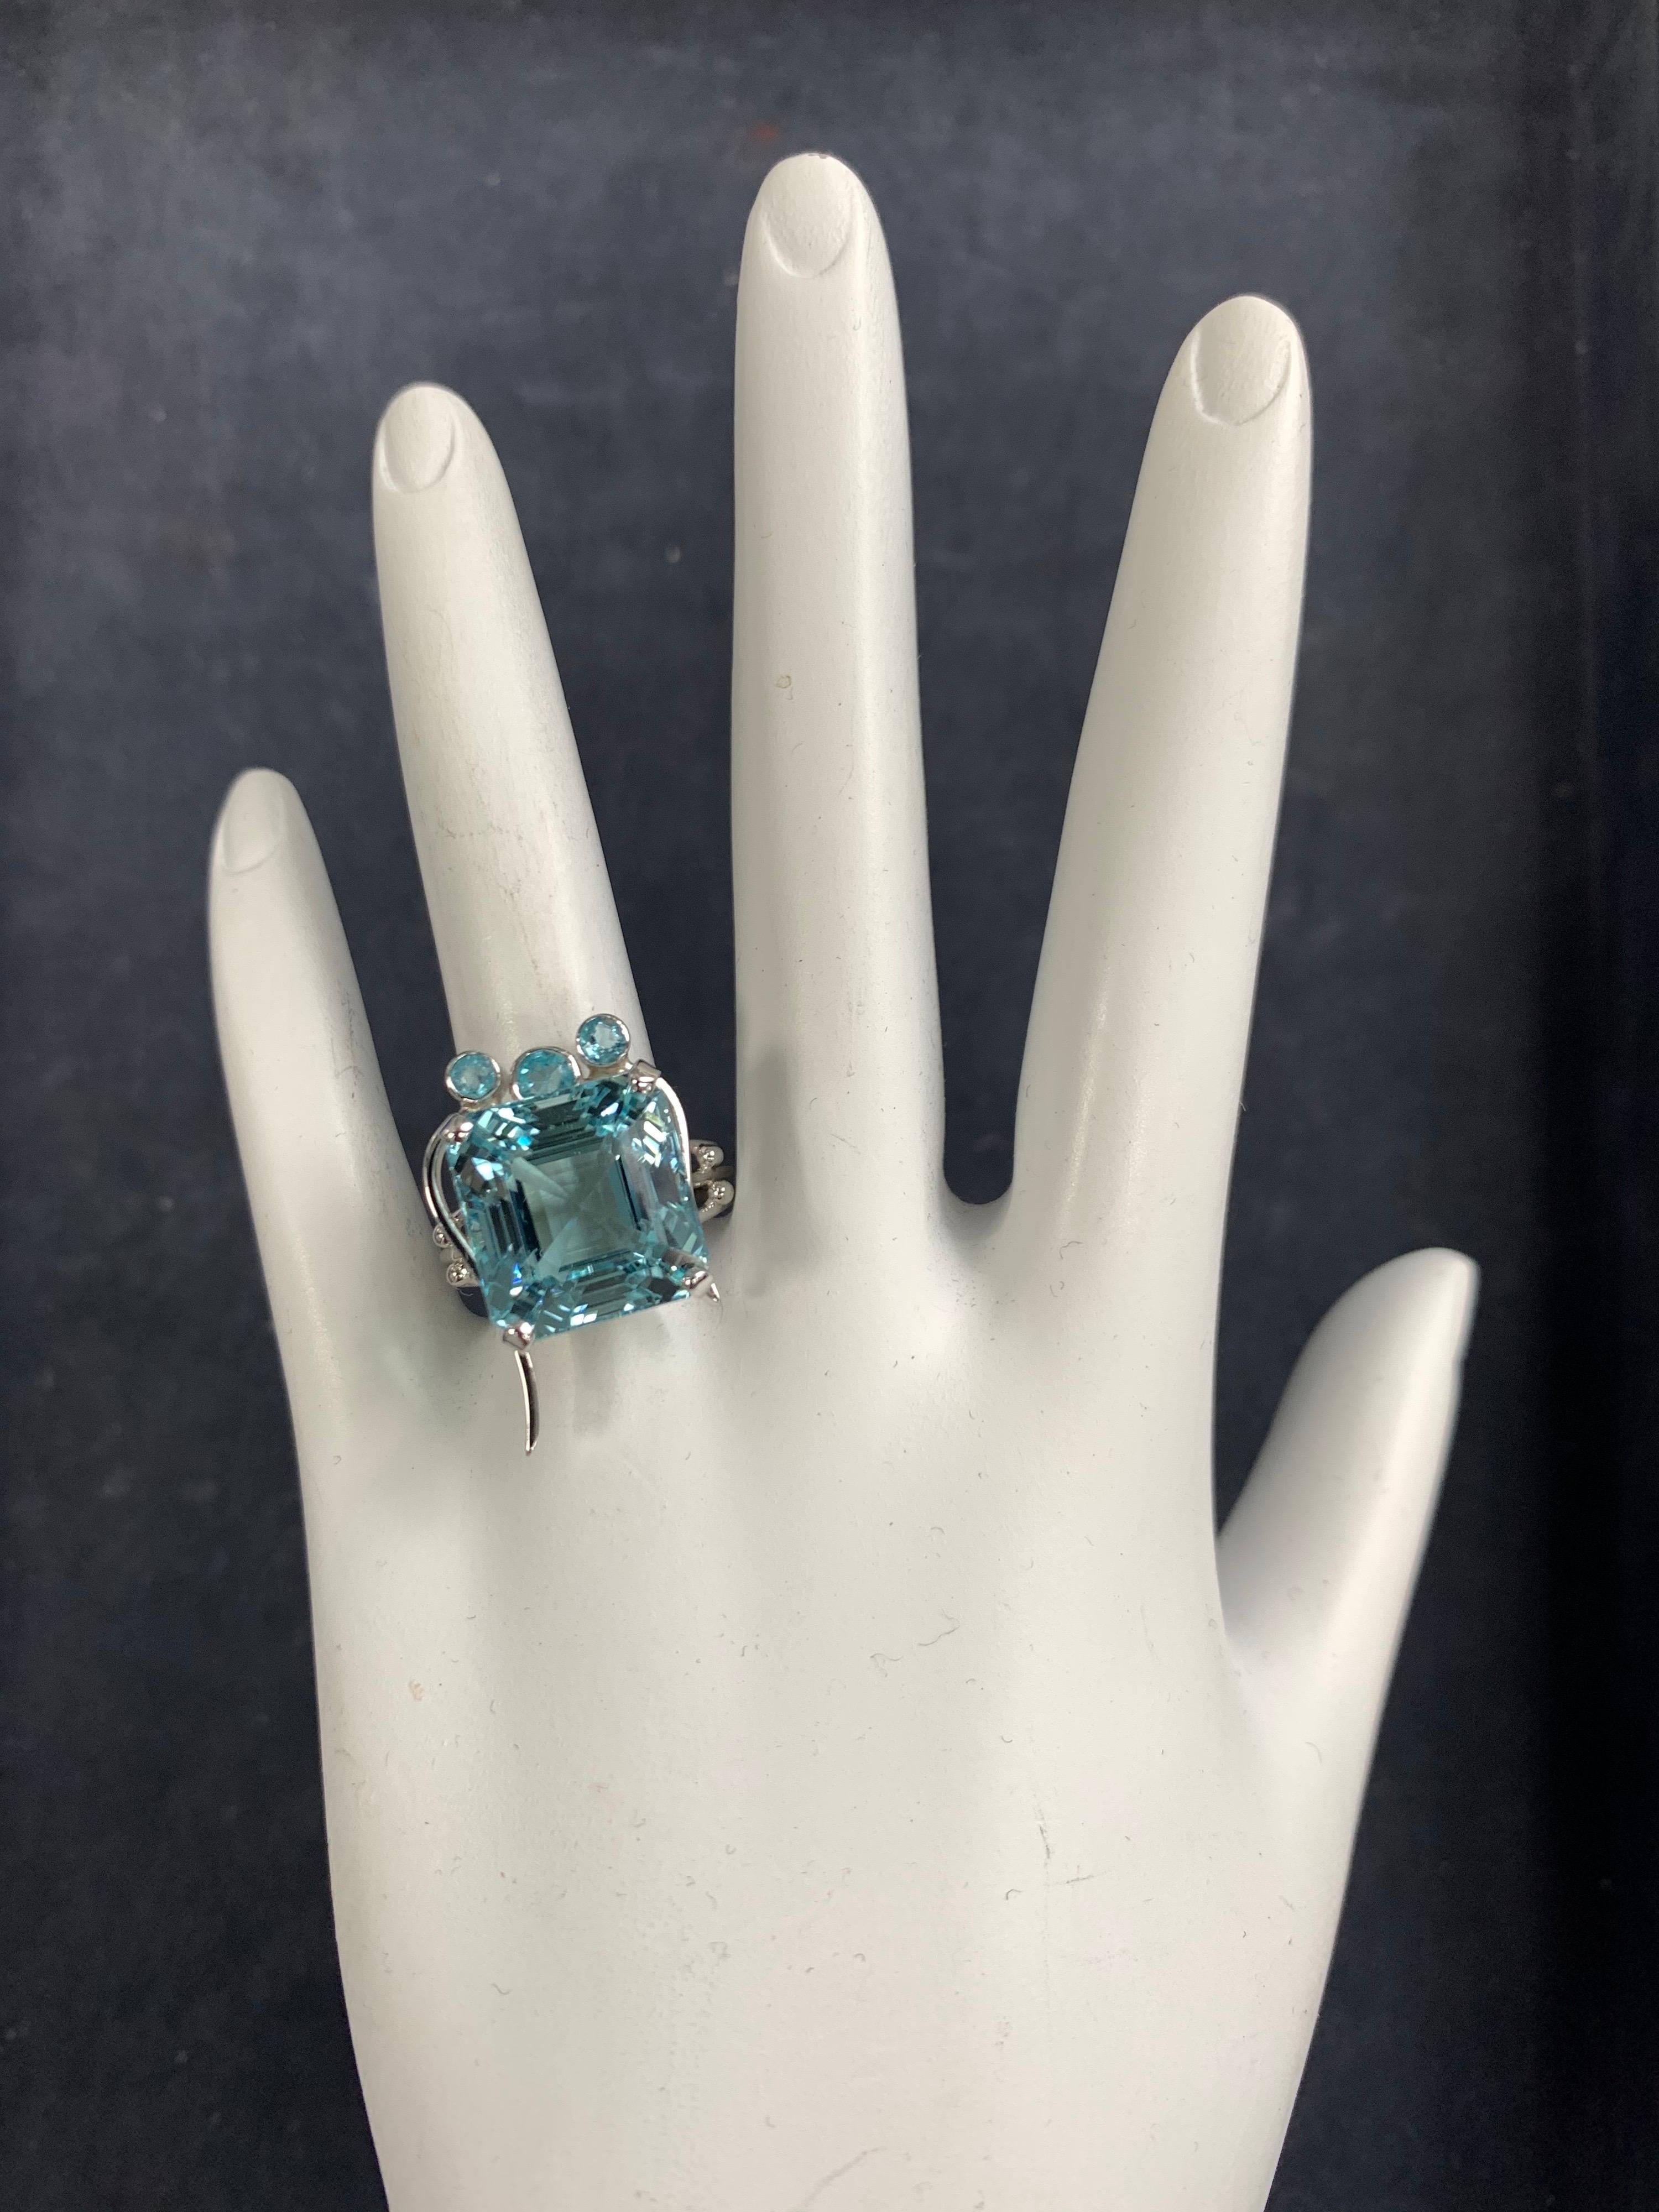 Stunning Art Deco Style 14k White Gold APX 15 Carat Natural Aquamarine Cocktail. 

The ring is set with a natural aquamarine center stone measuring approximately 13.3x12.6x11.6mm, weighing approximately 15 carats.

The ring is a size 7.25 and weighs